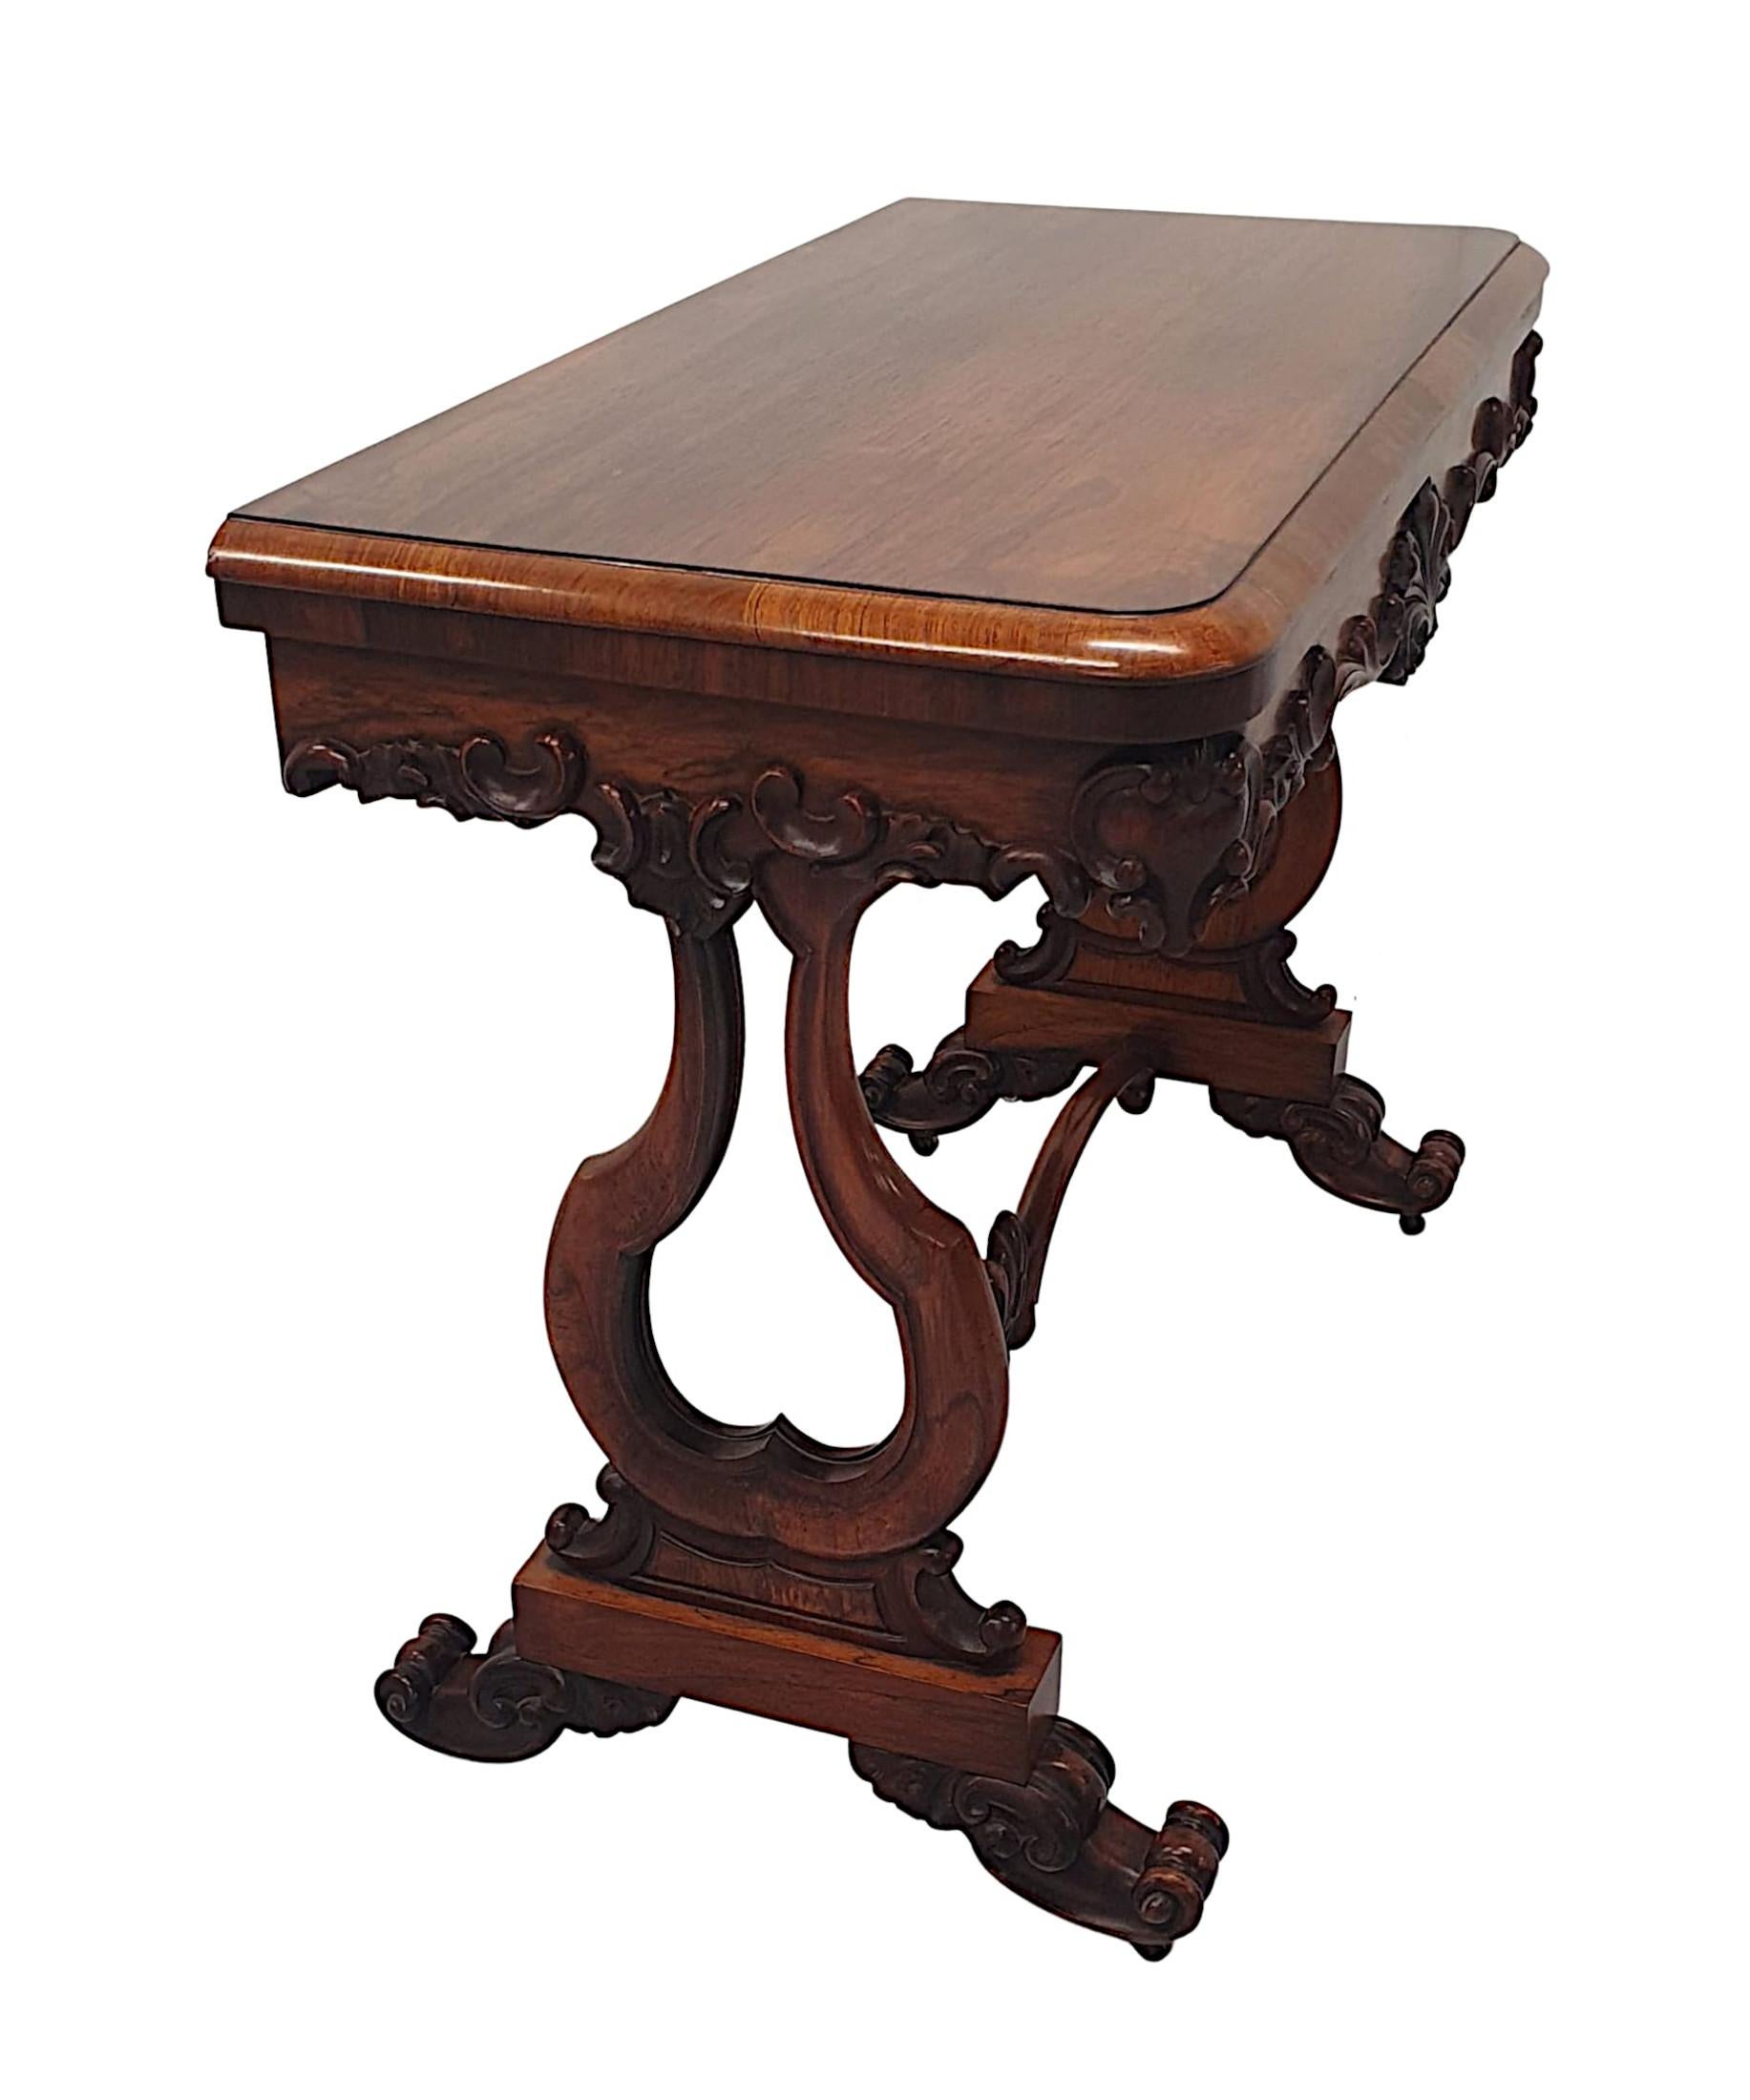 English Rare and Unusual Early 19th Century Turn over Leaf Card Table For Sale